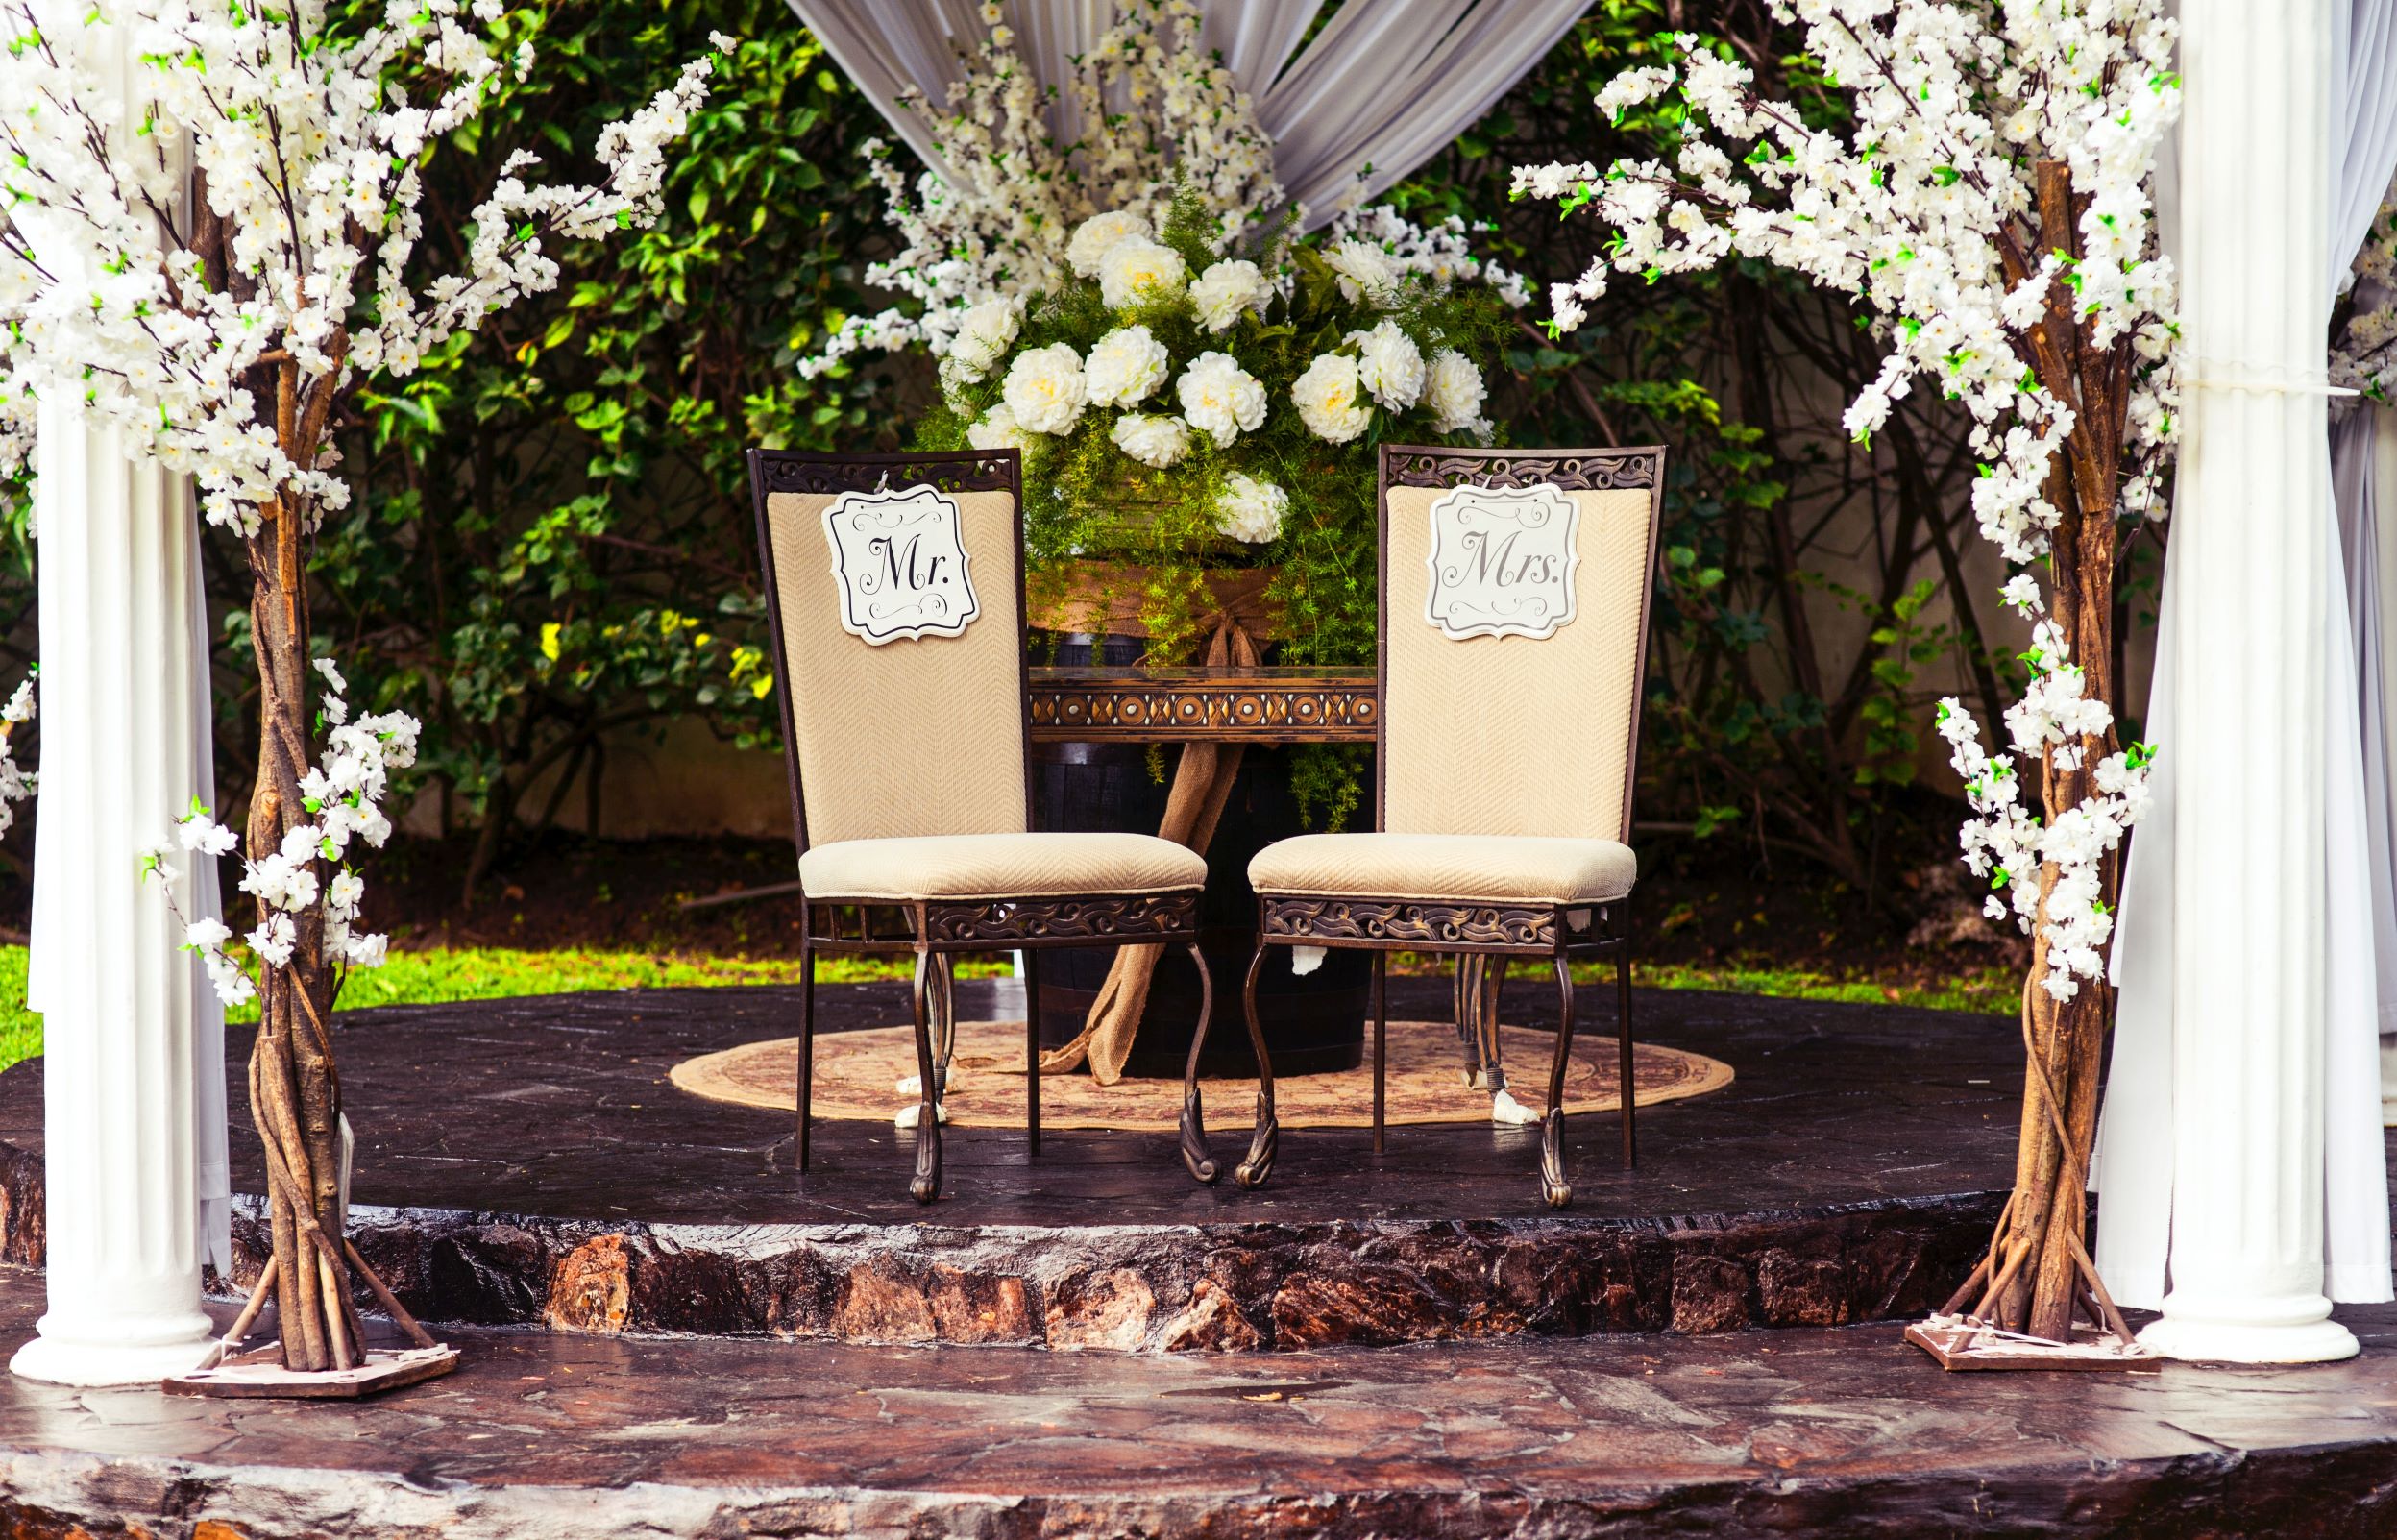 Promising Signs: Image of two chairs under a wedding gazebo with "Mr" and "Mrs" signs on them. The Gazebo has white drapes and flowers